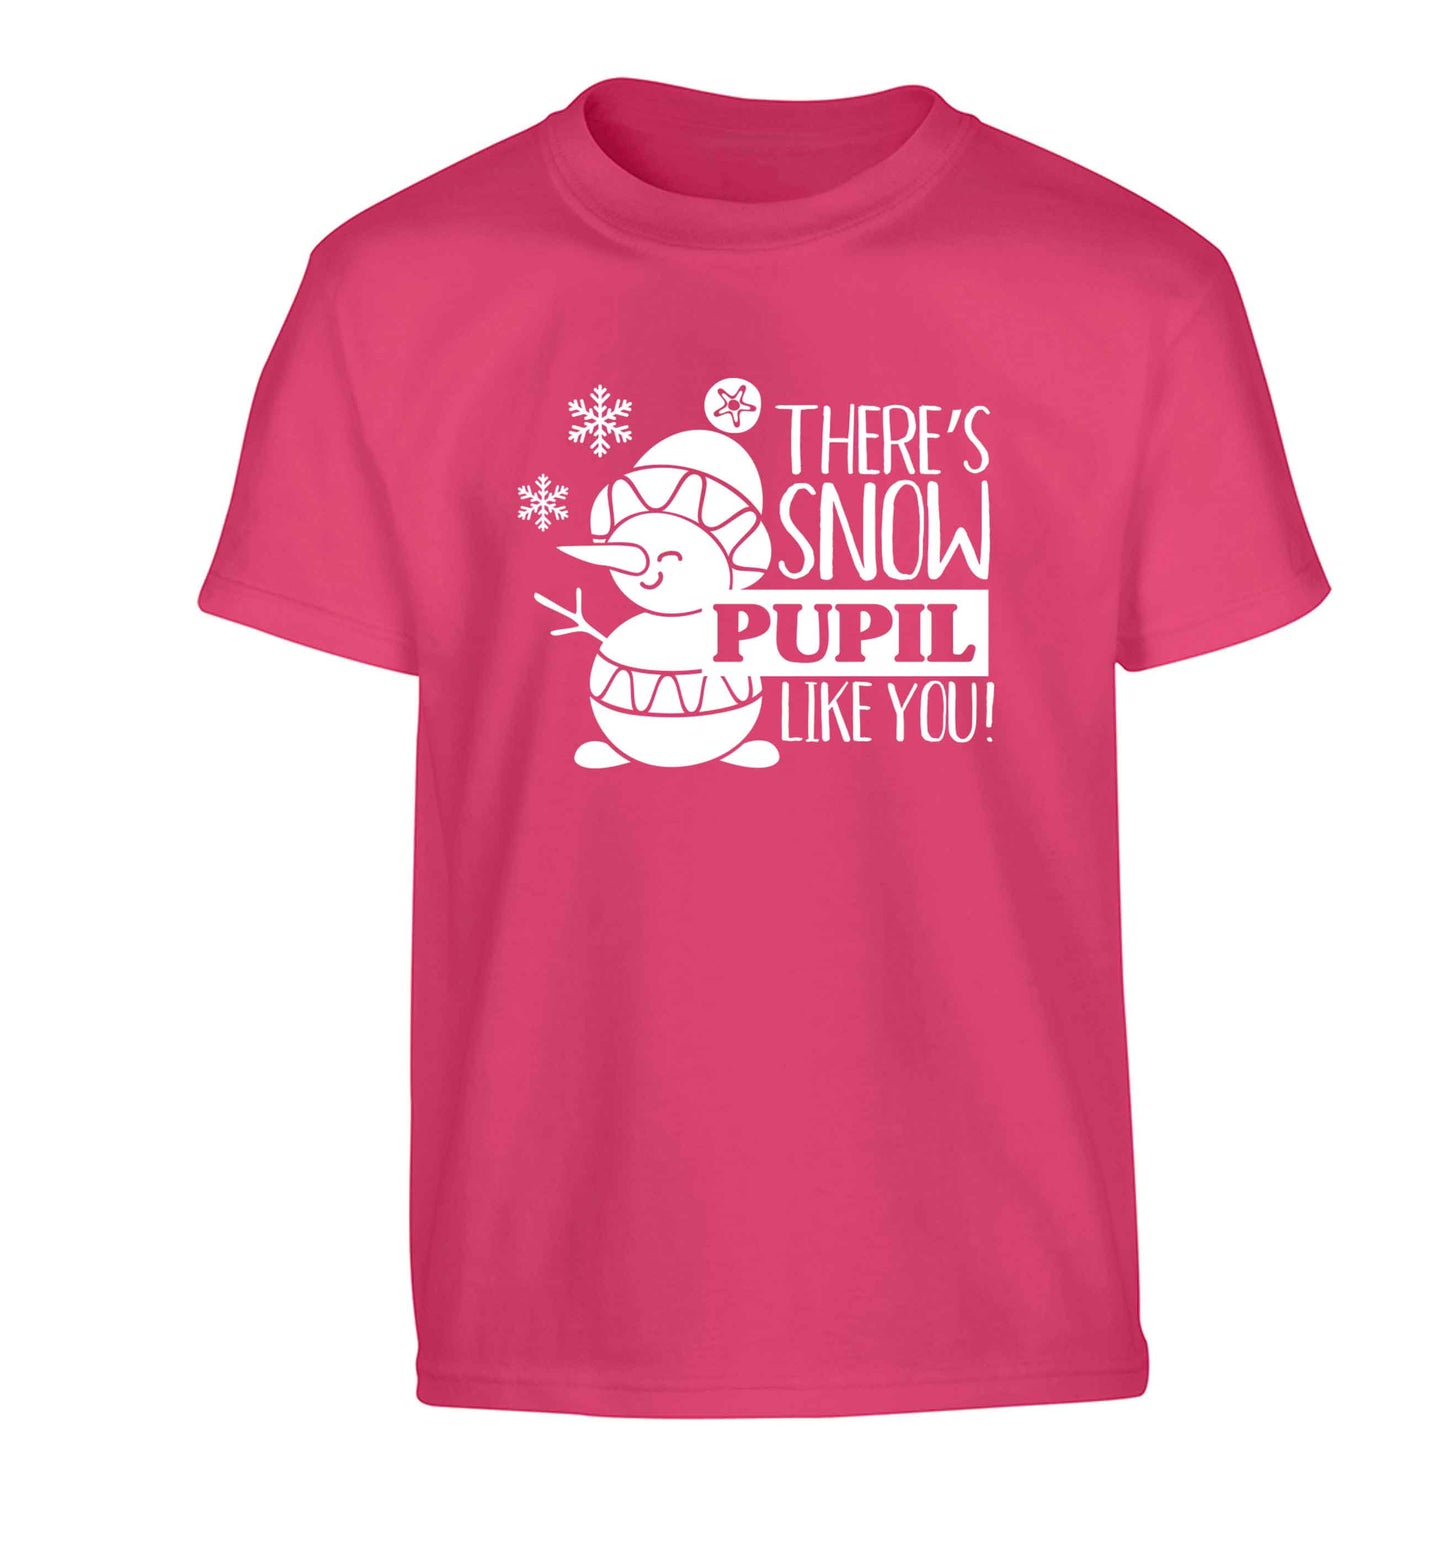 There's snow pupil like you Children's pink Tshirt 12-13 Years